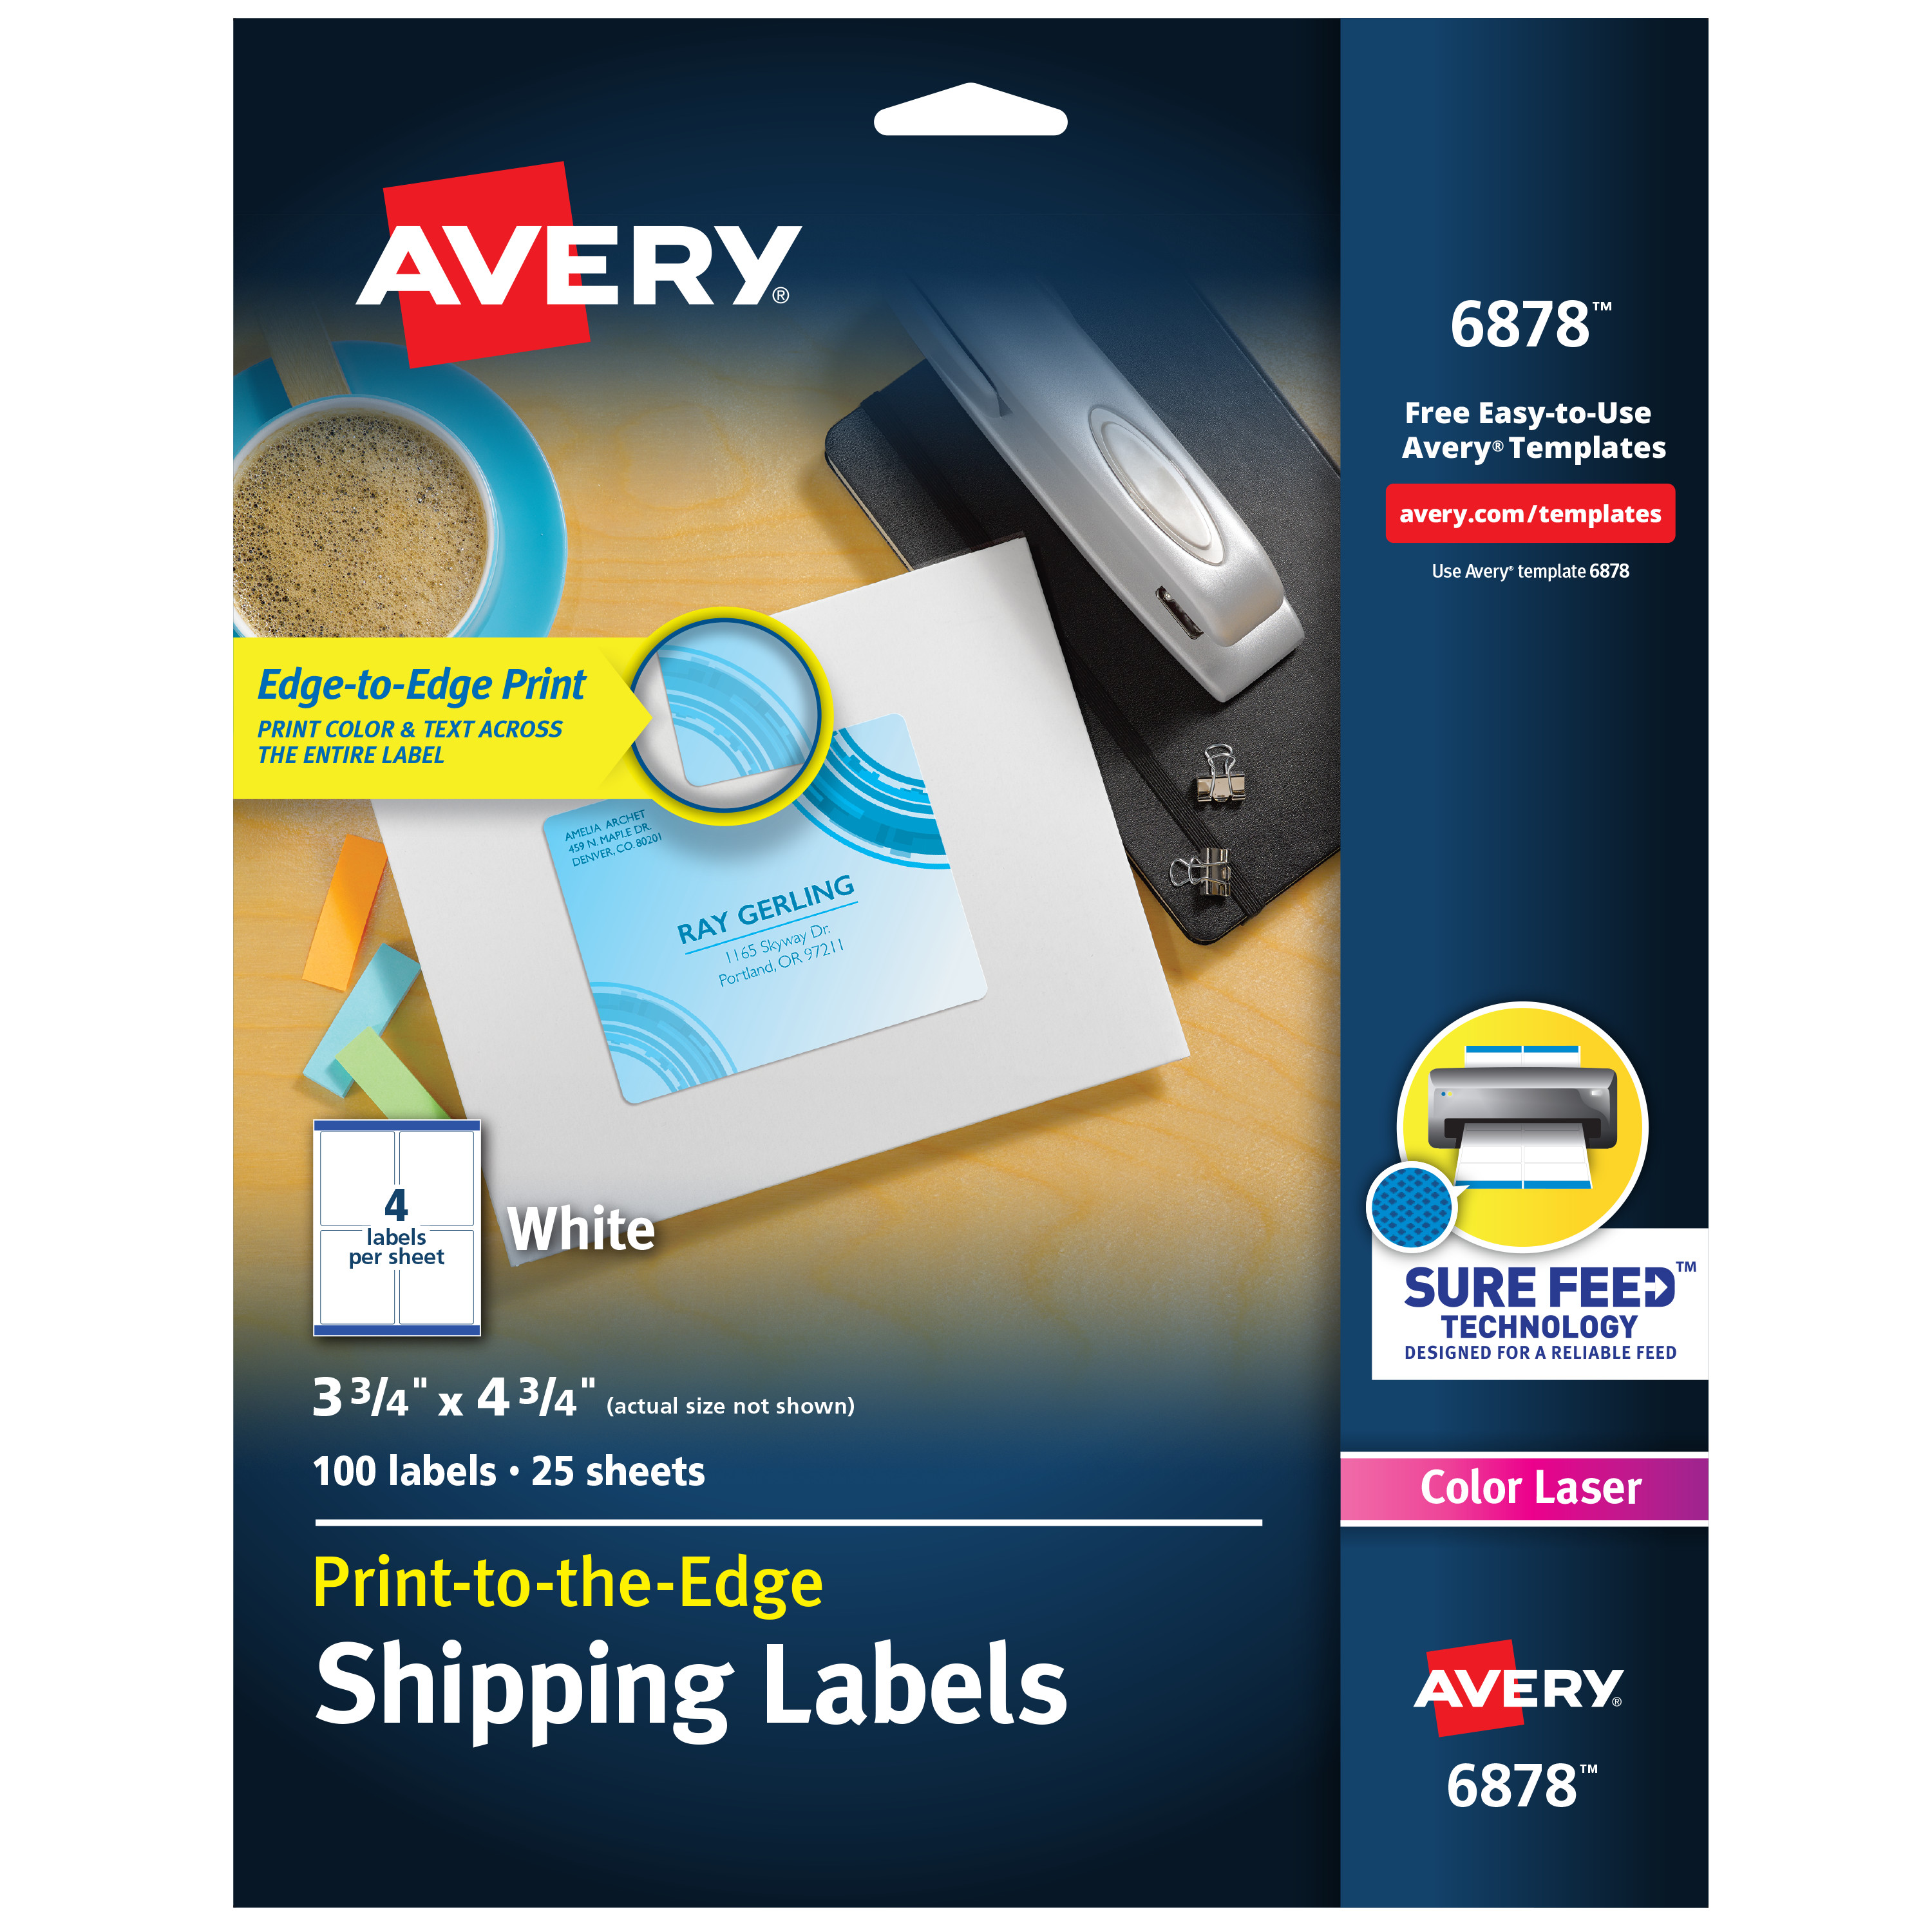 Avery Shipping Labels with Sure Feed for Color Laser Printers, Print-to-the-Edge, 3-3/4" x 4-3/4", 100 White Labels (6878) - image 1 of 9